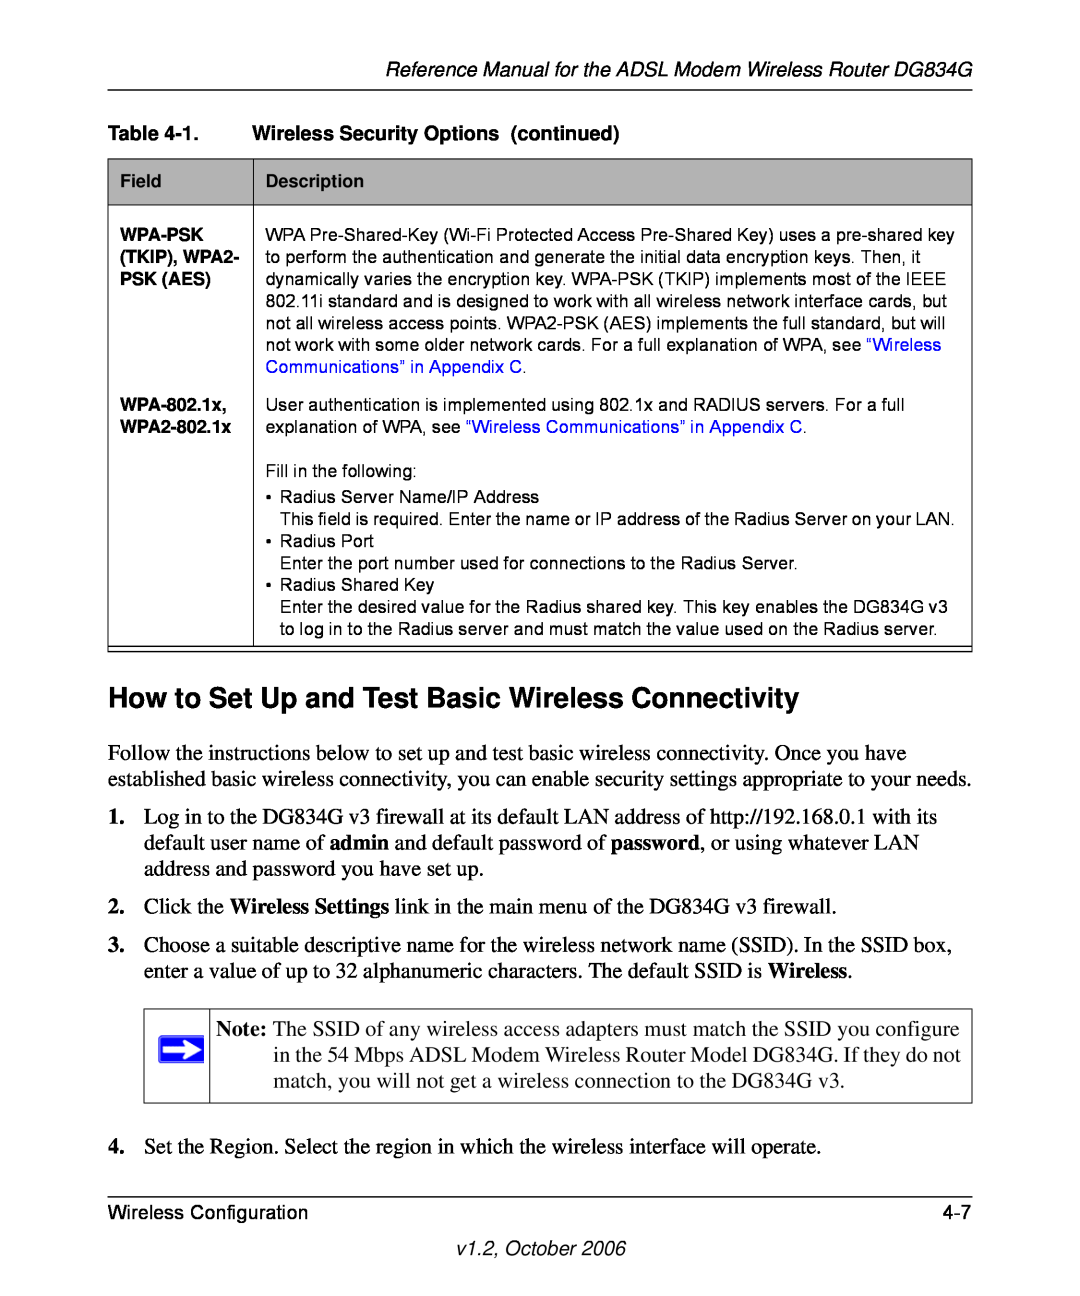 NETGEAR DG834G manual How to Set Up and Test Basic Wireless Connectivity 